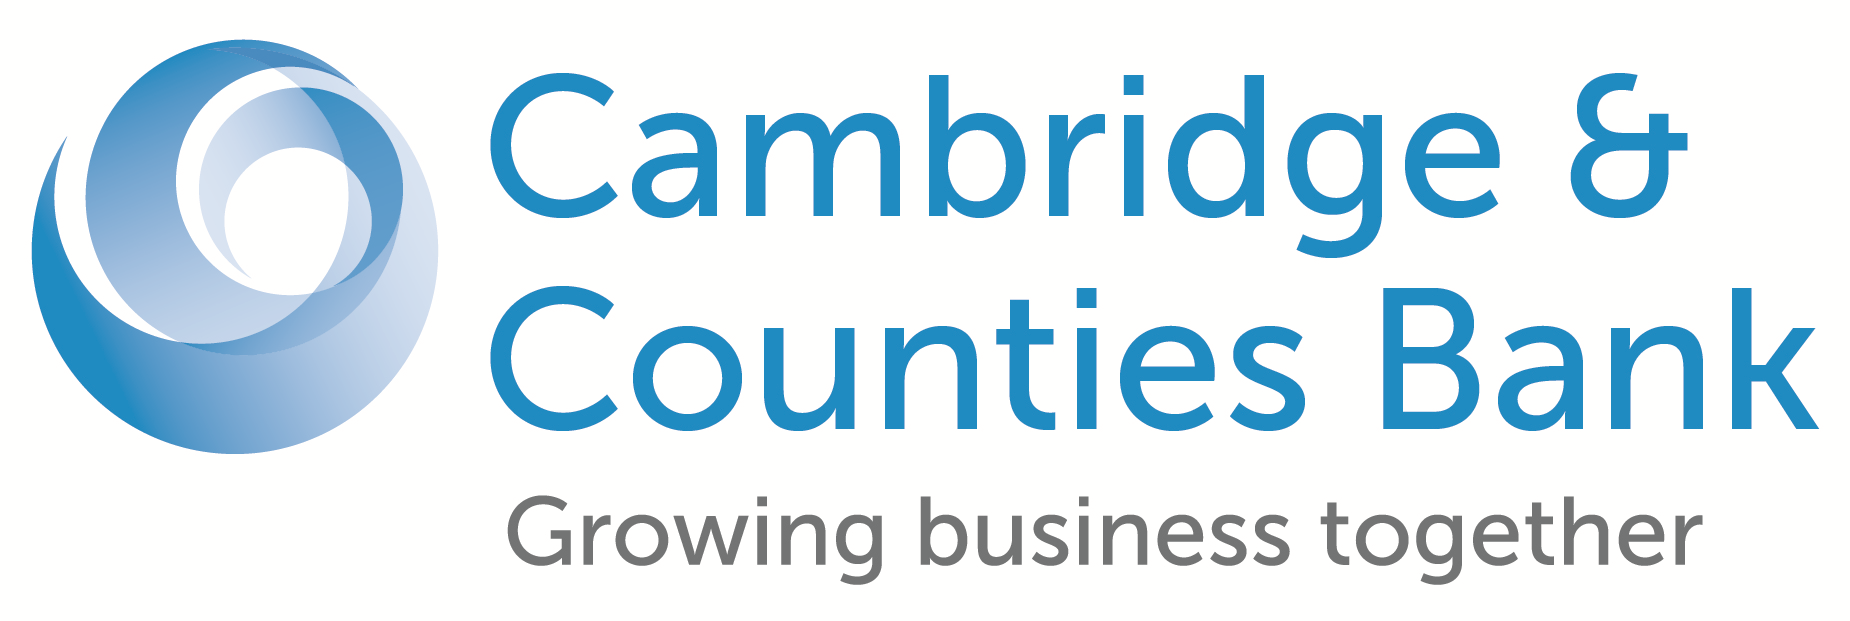 Cambridge & Counties Bank announces new asset finance campaign for brokers